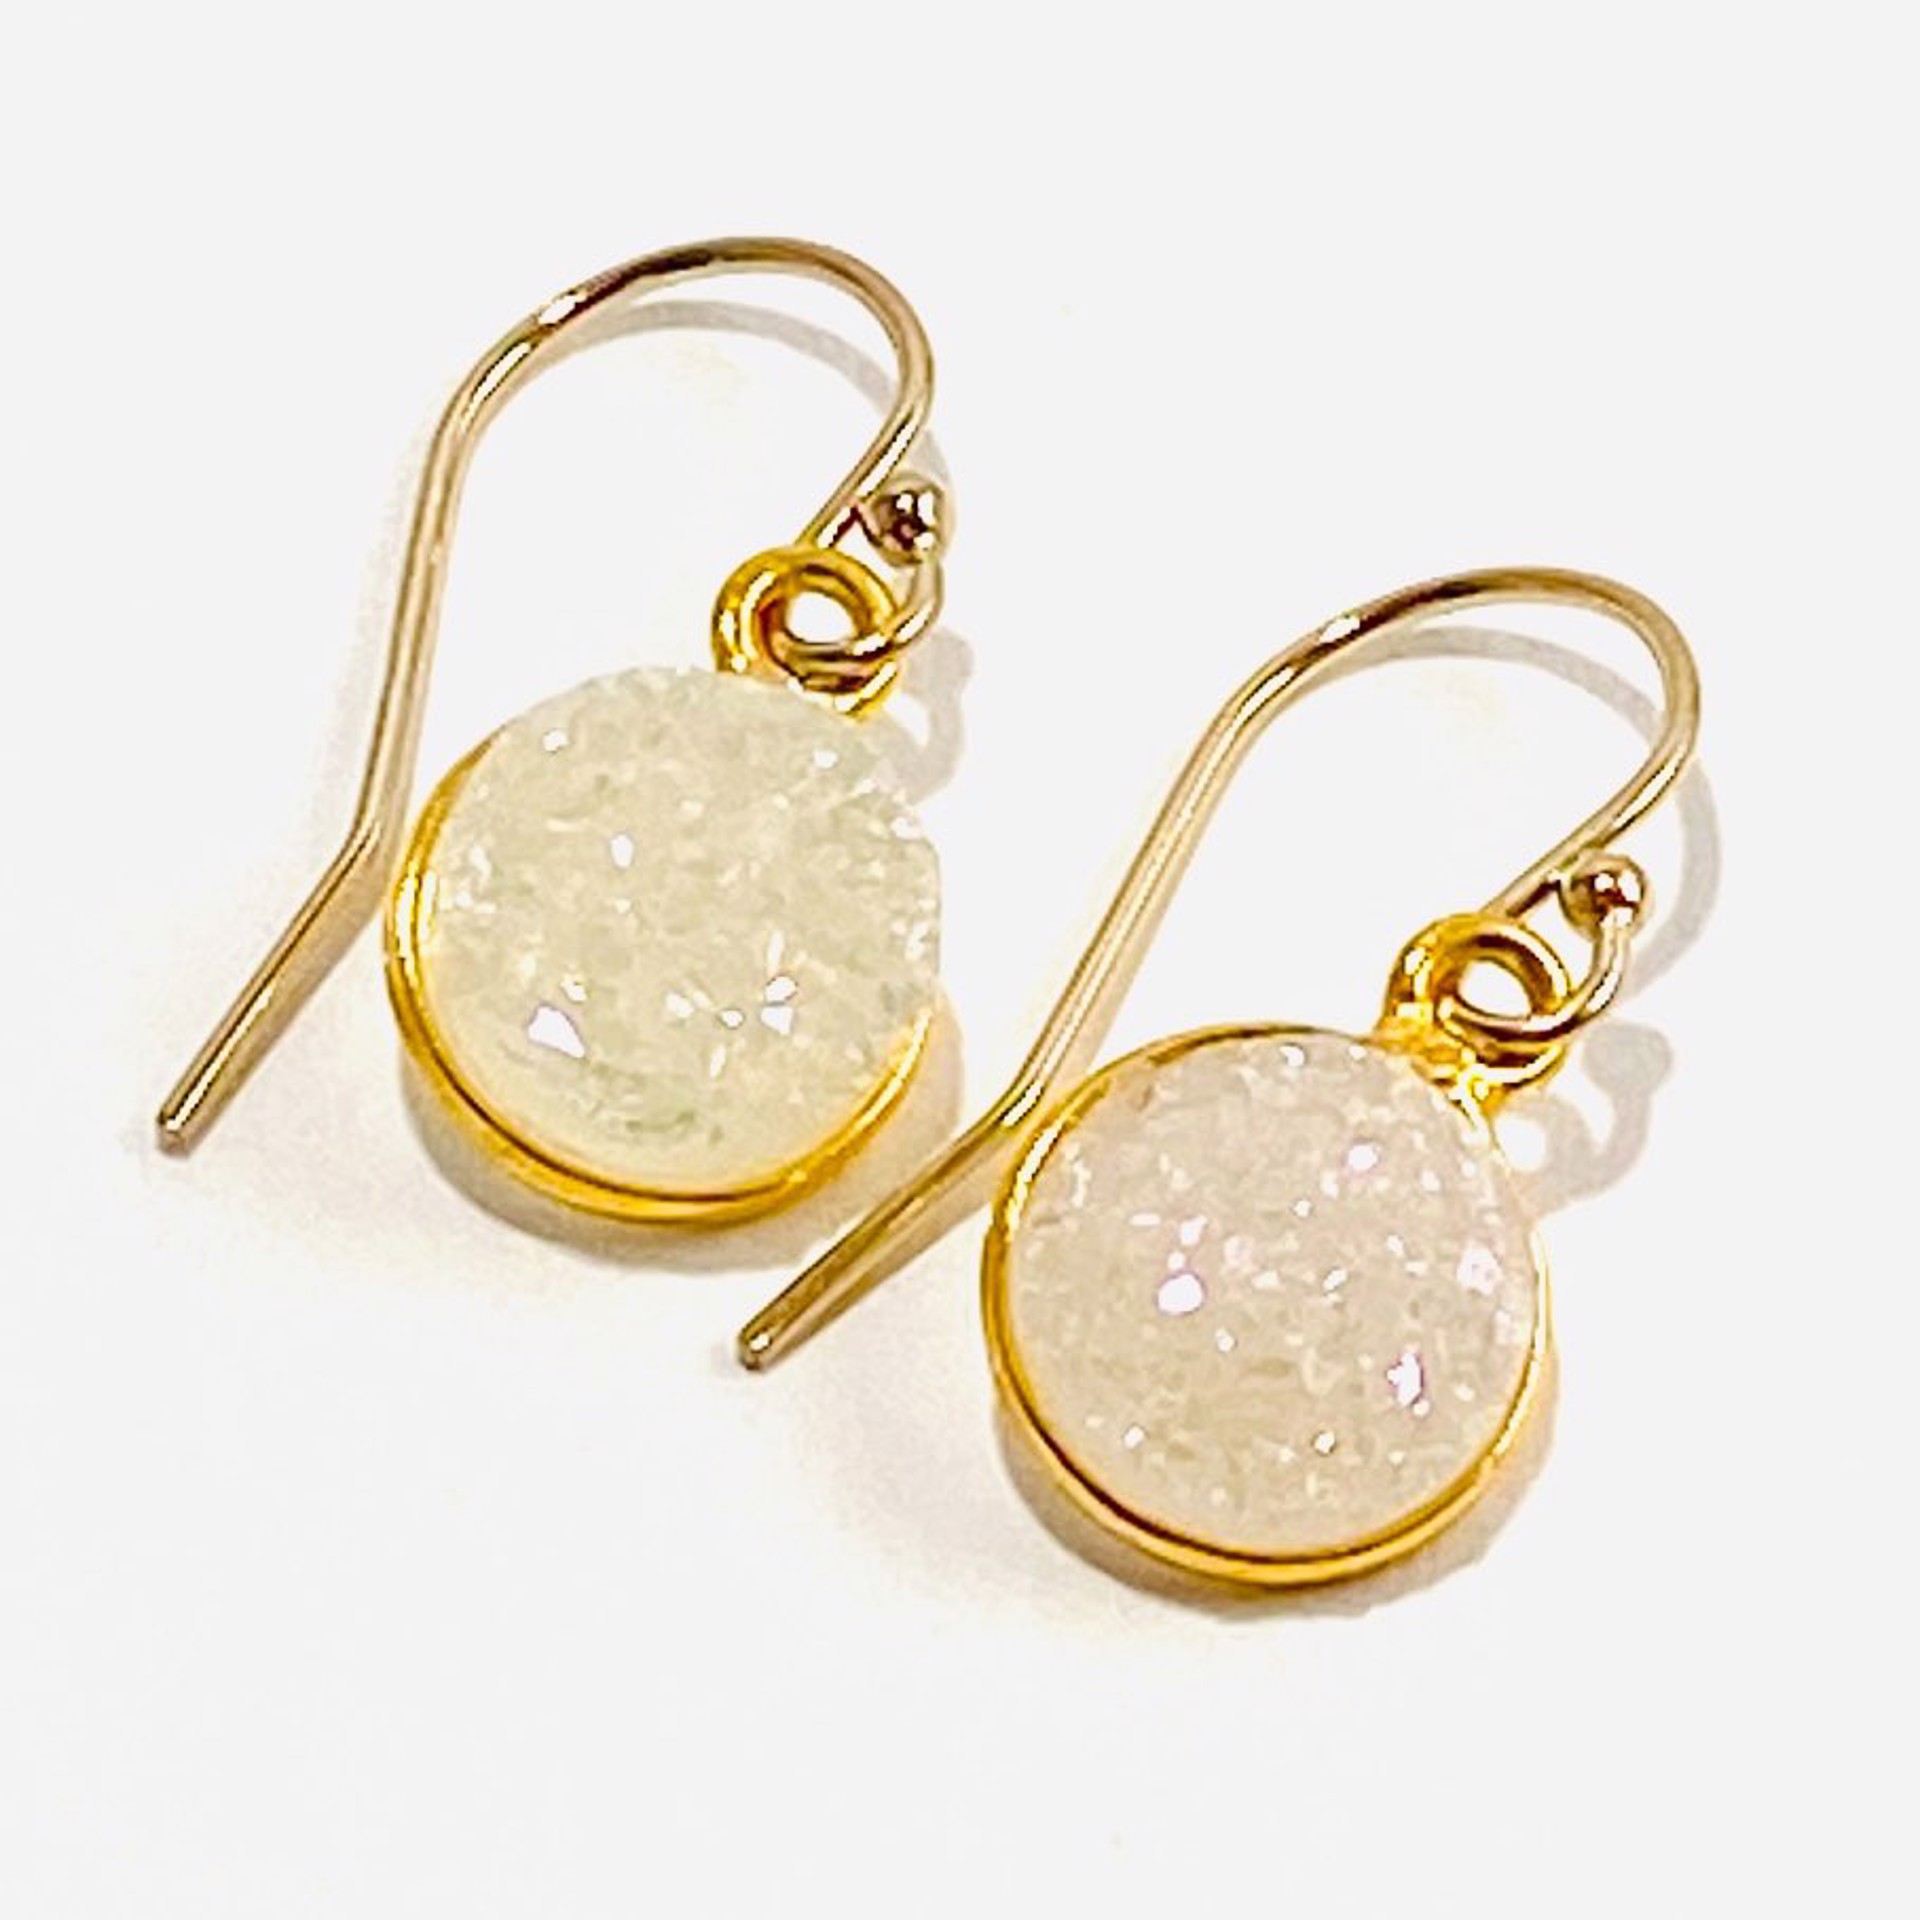 NT22-229 Small Round Sparkly White Druzy Earrings by Nance Trueworthy